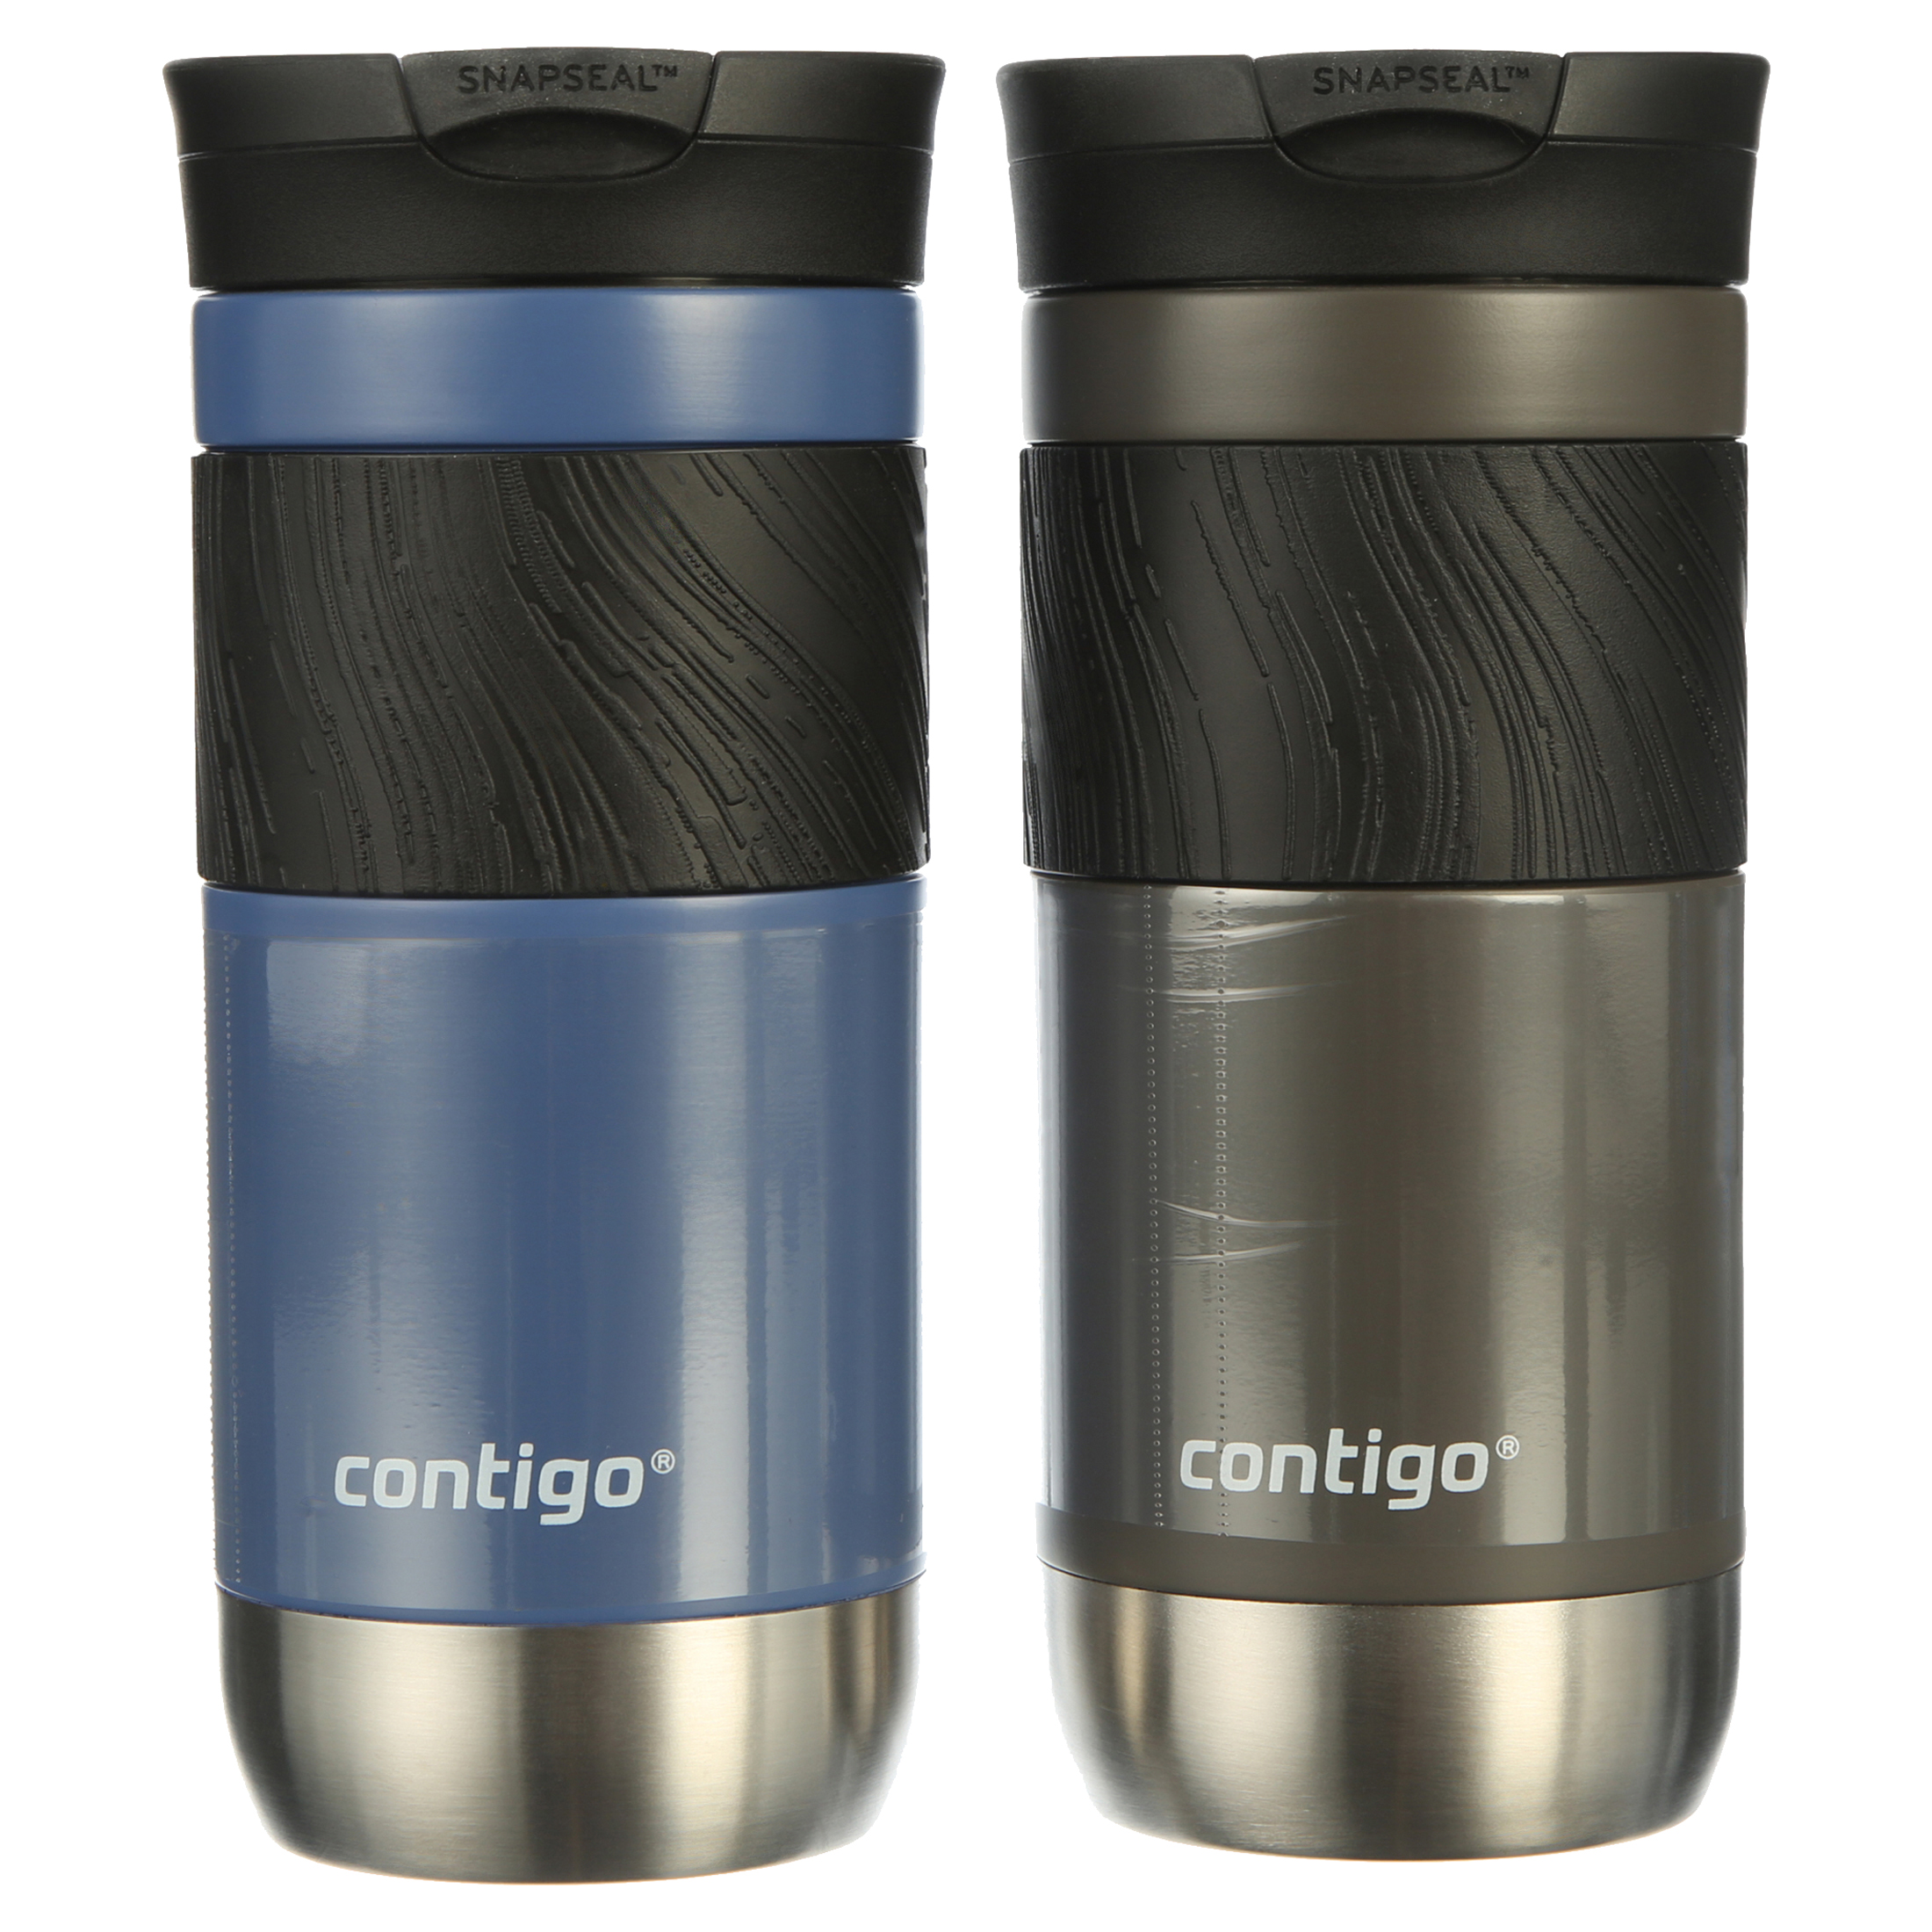 Contigo Byron 2.0 Stainless Steel Travel Mug with SNAPSEAL Lid and Grip Sake and Blue Corn, 16 fl oz., 2-Pack - image 2 of 11